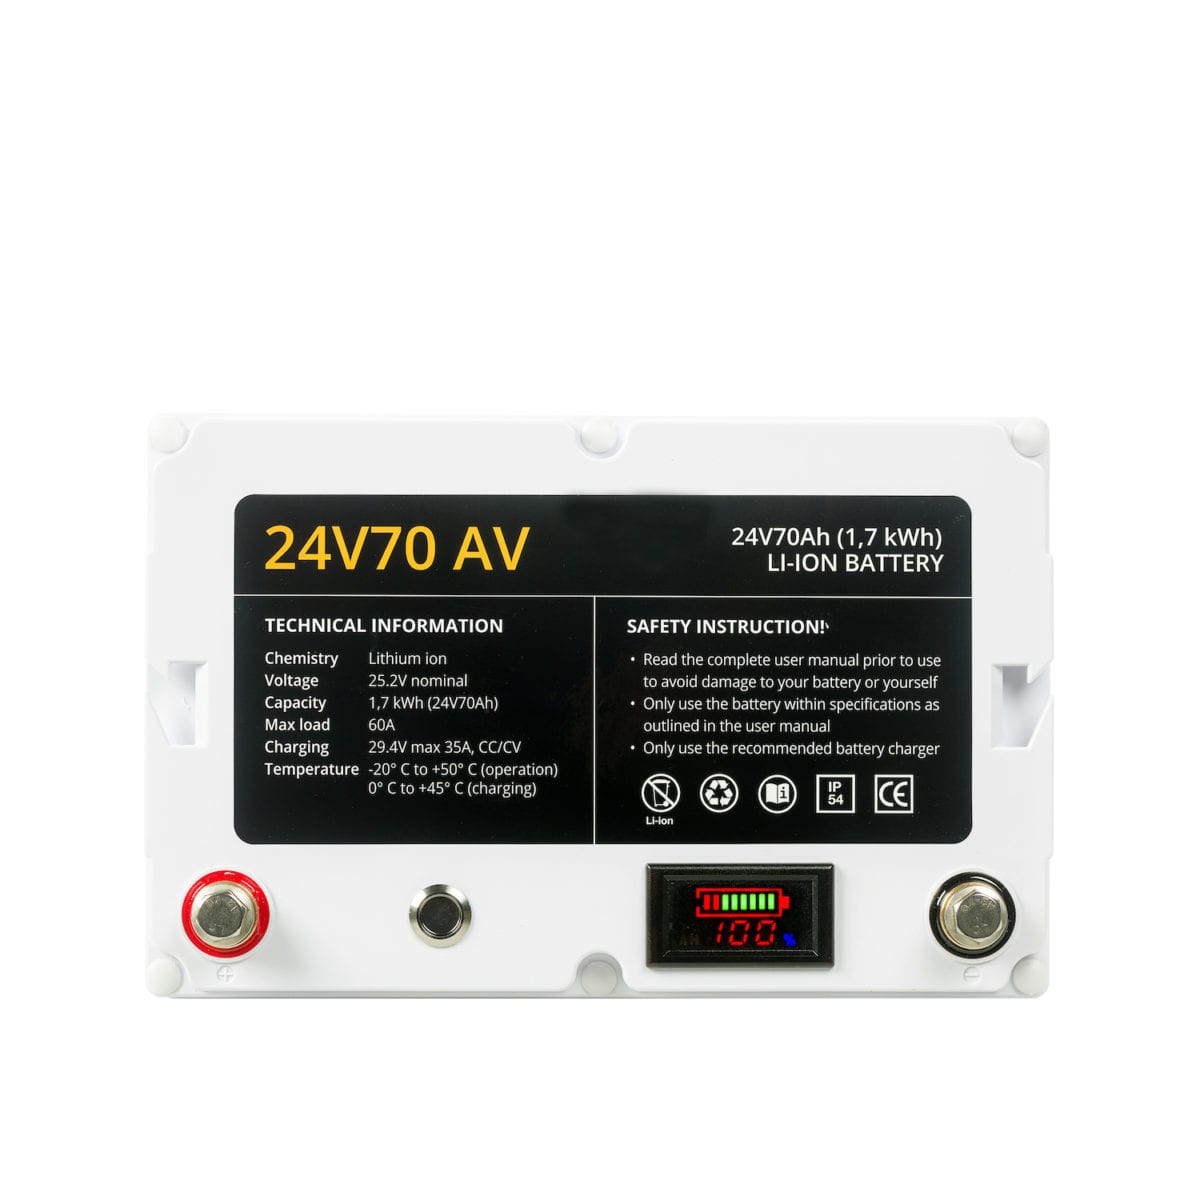 Rebelcell 24V70 battery product image